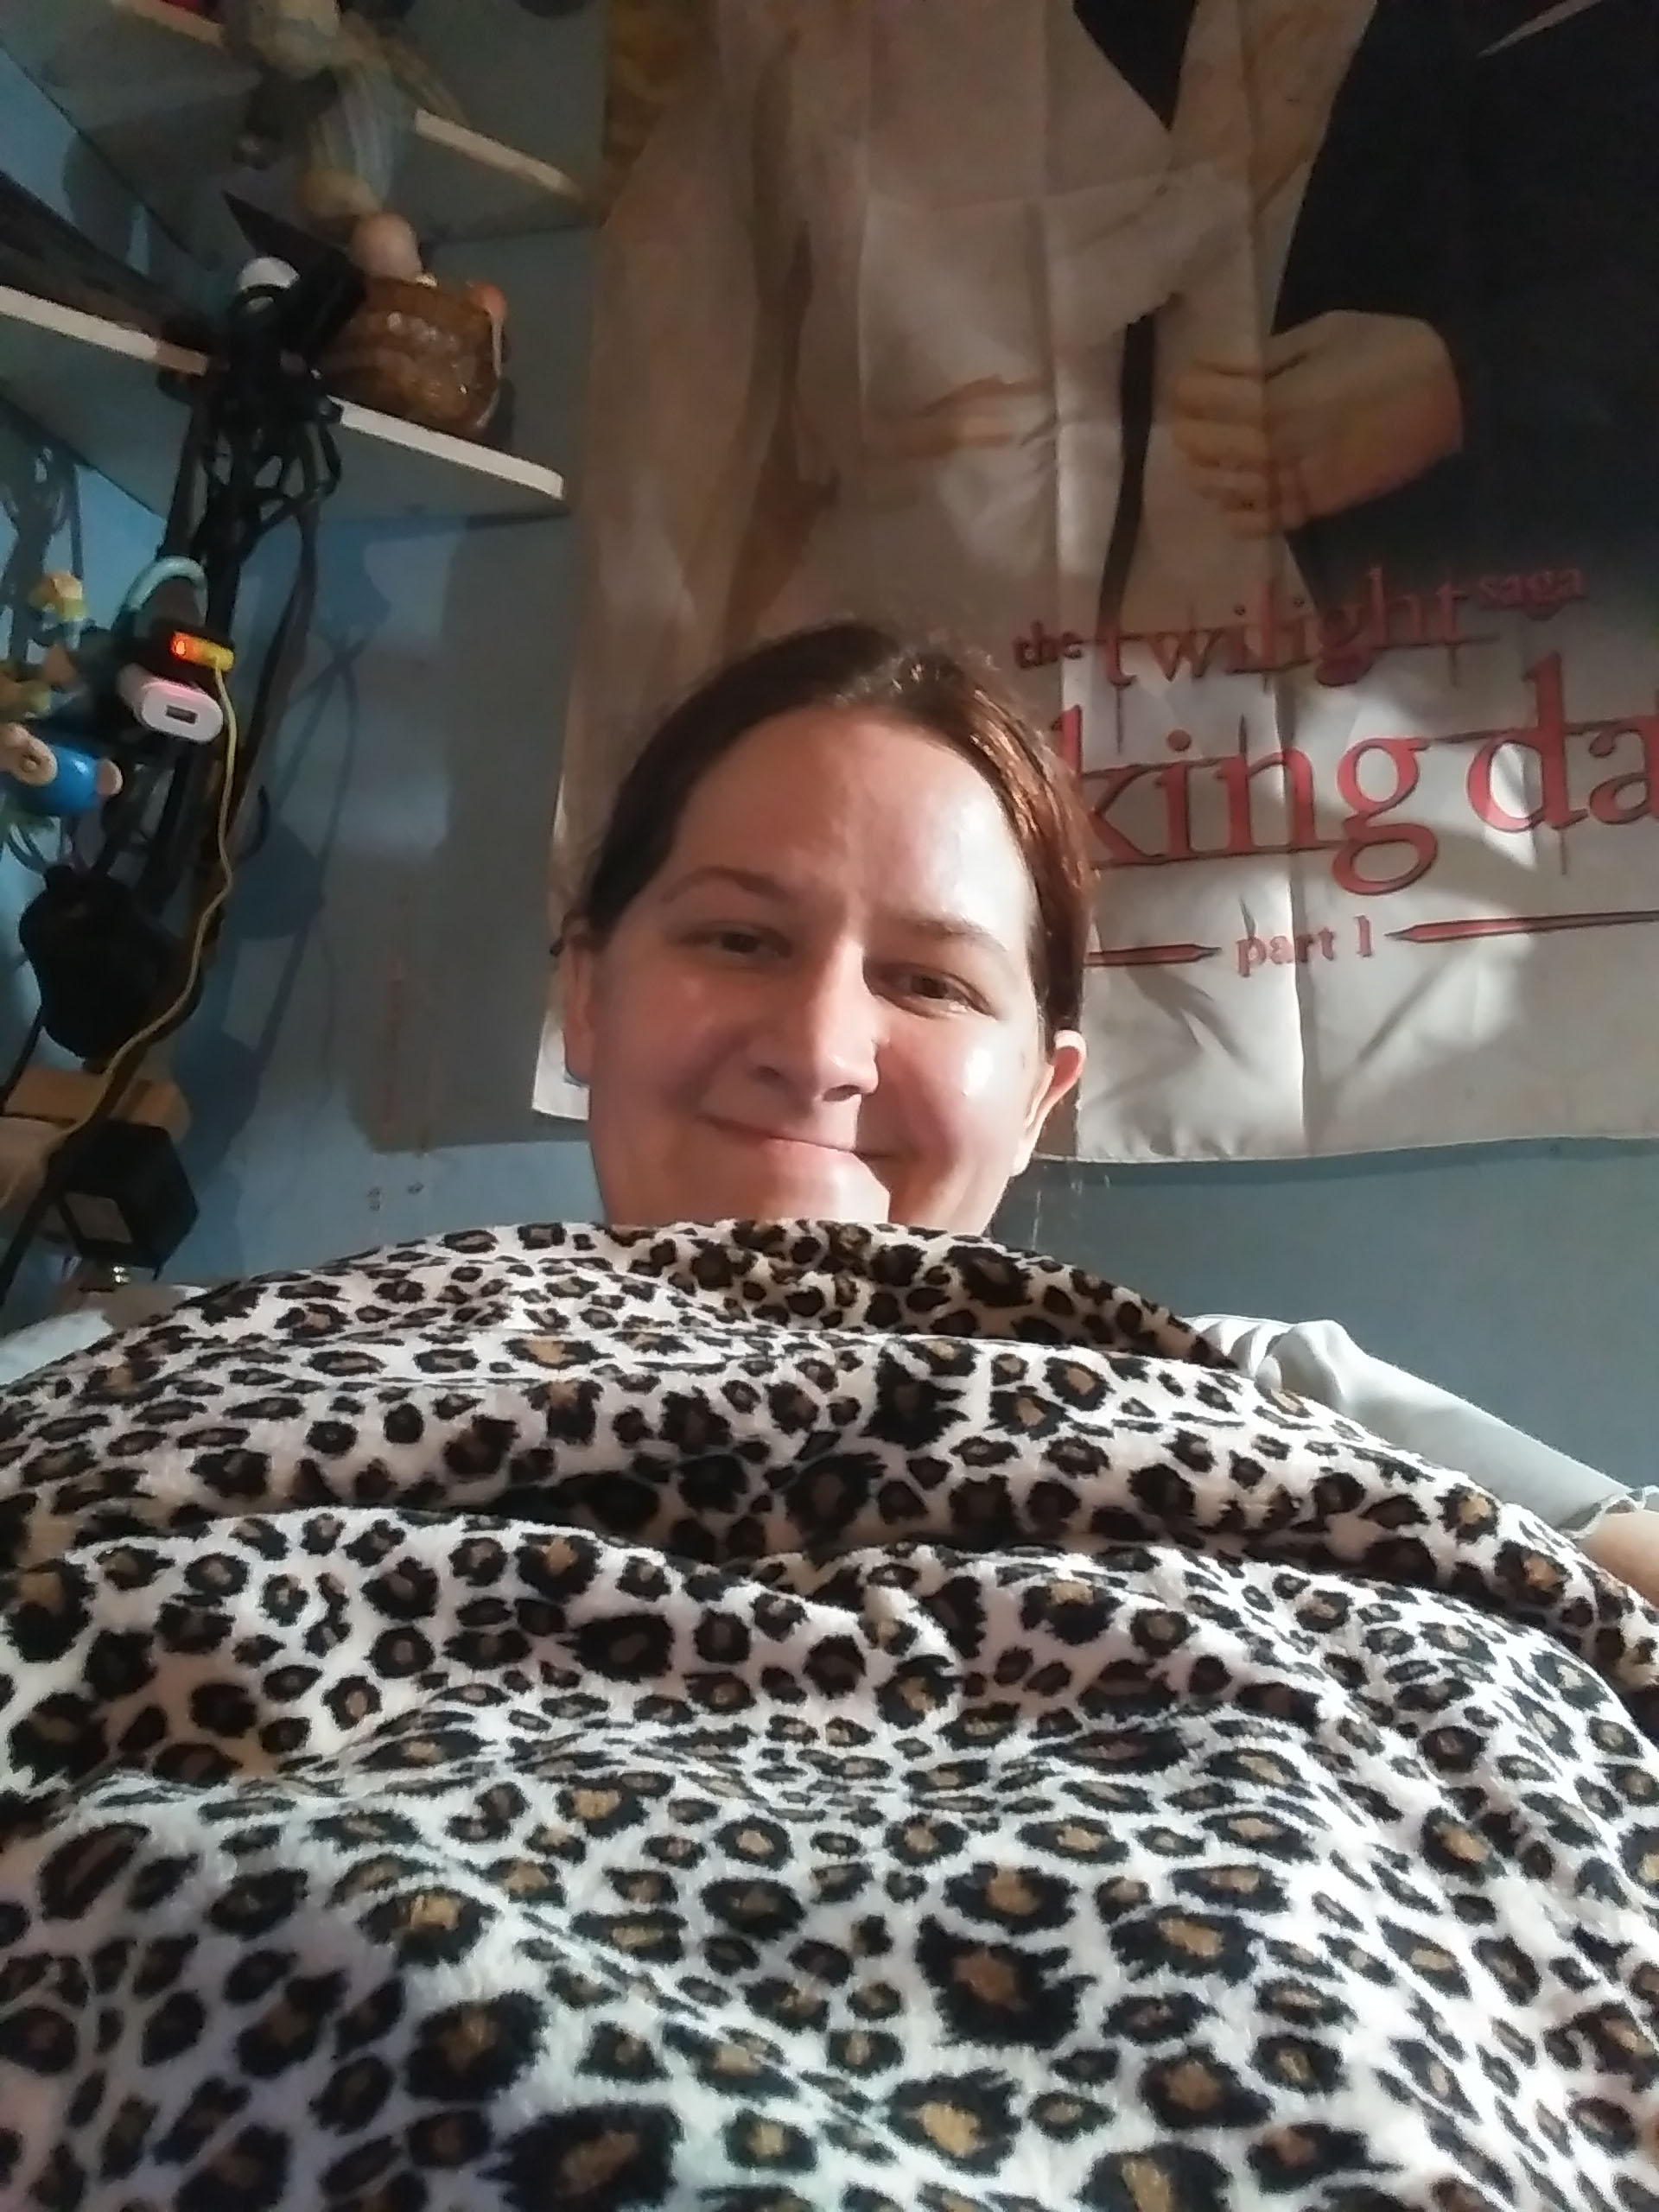 New Weighted Blanket for Tiffany!